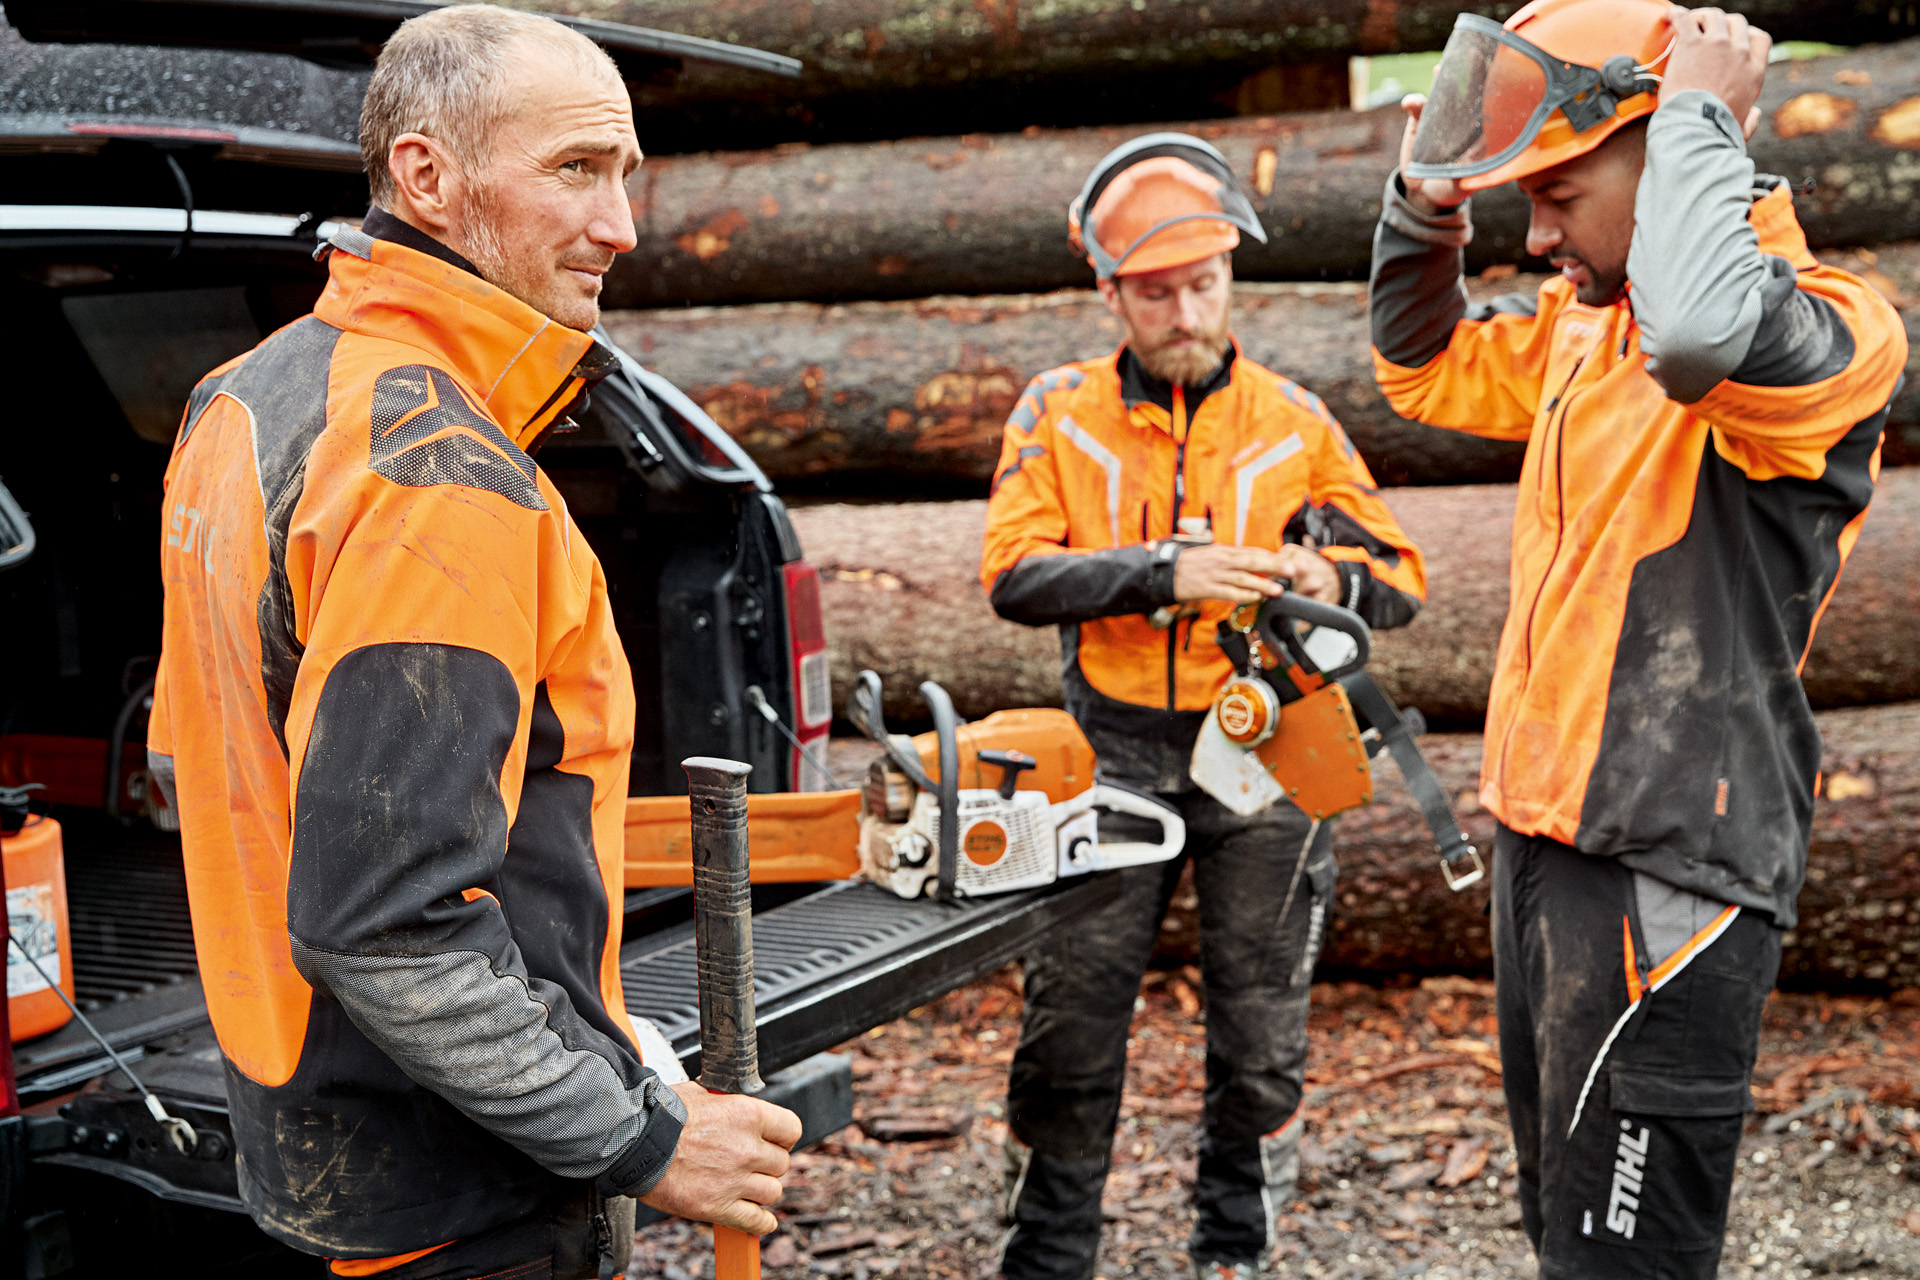 Three men wearing STIHL protective clothing prepare to work with a STIHL chainsaw with a stack of tree trunks behind